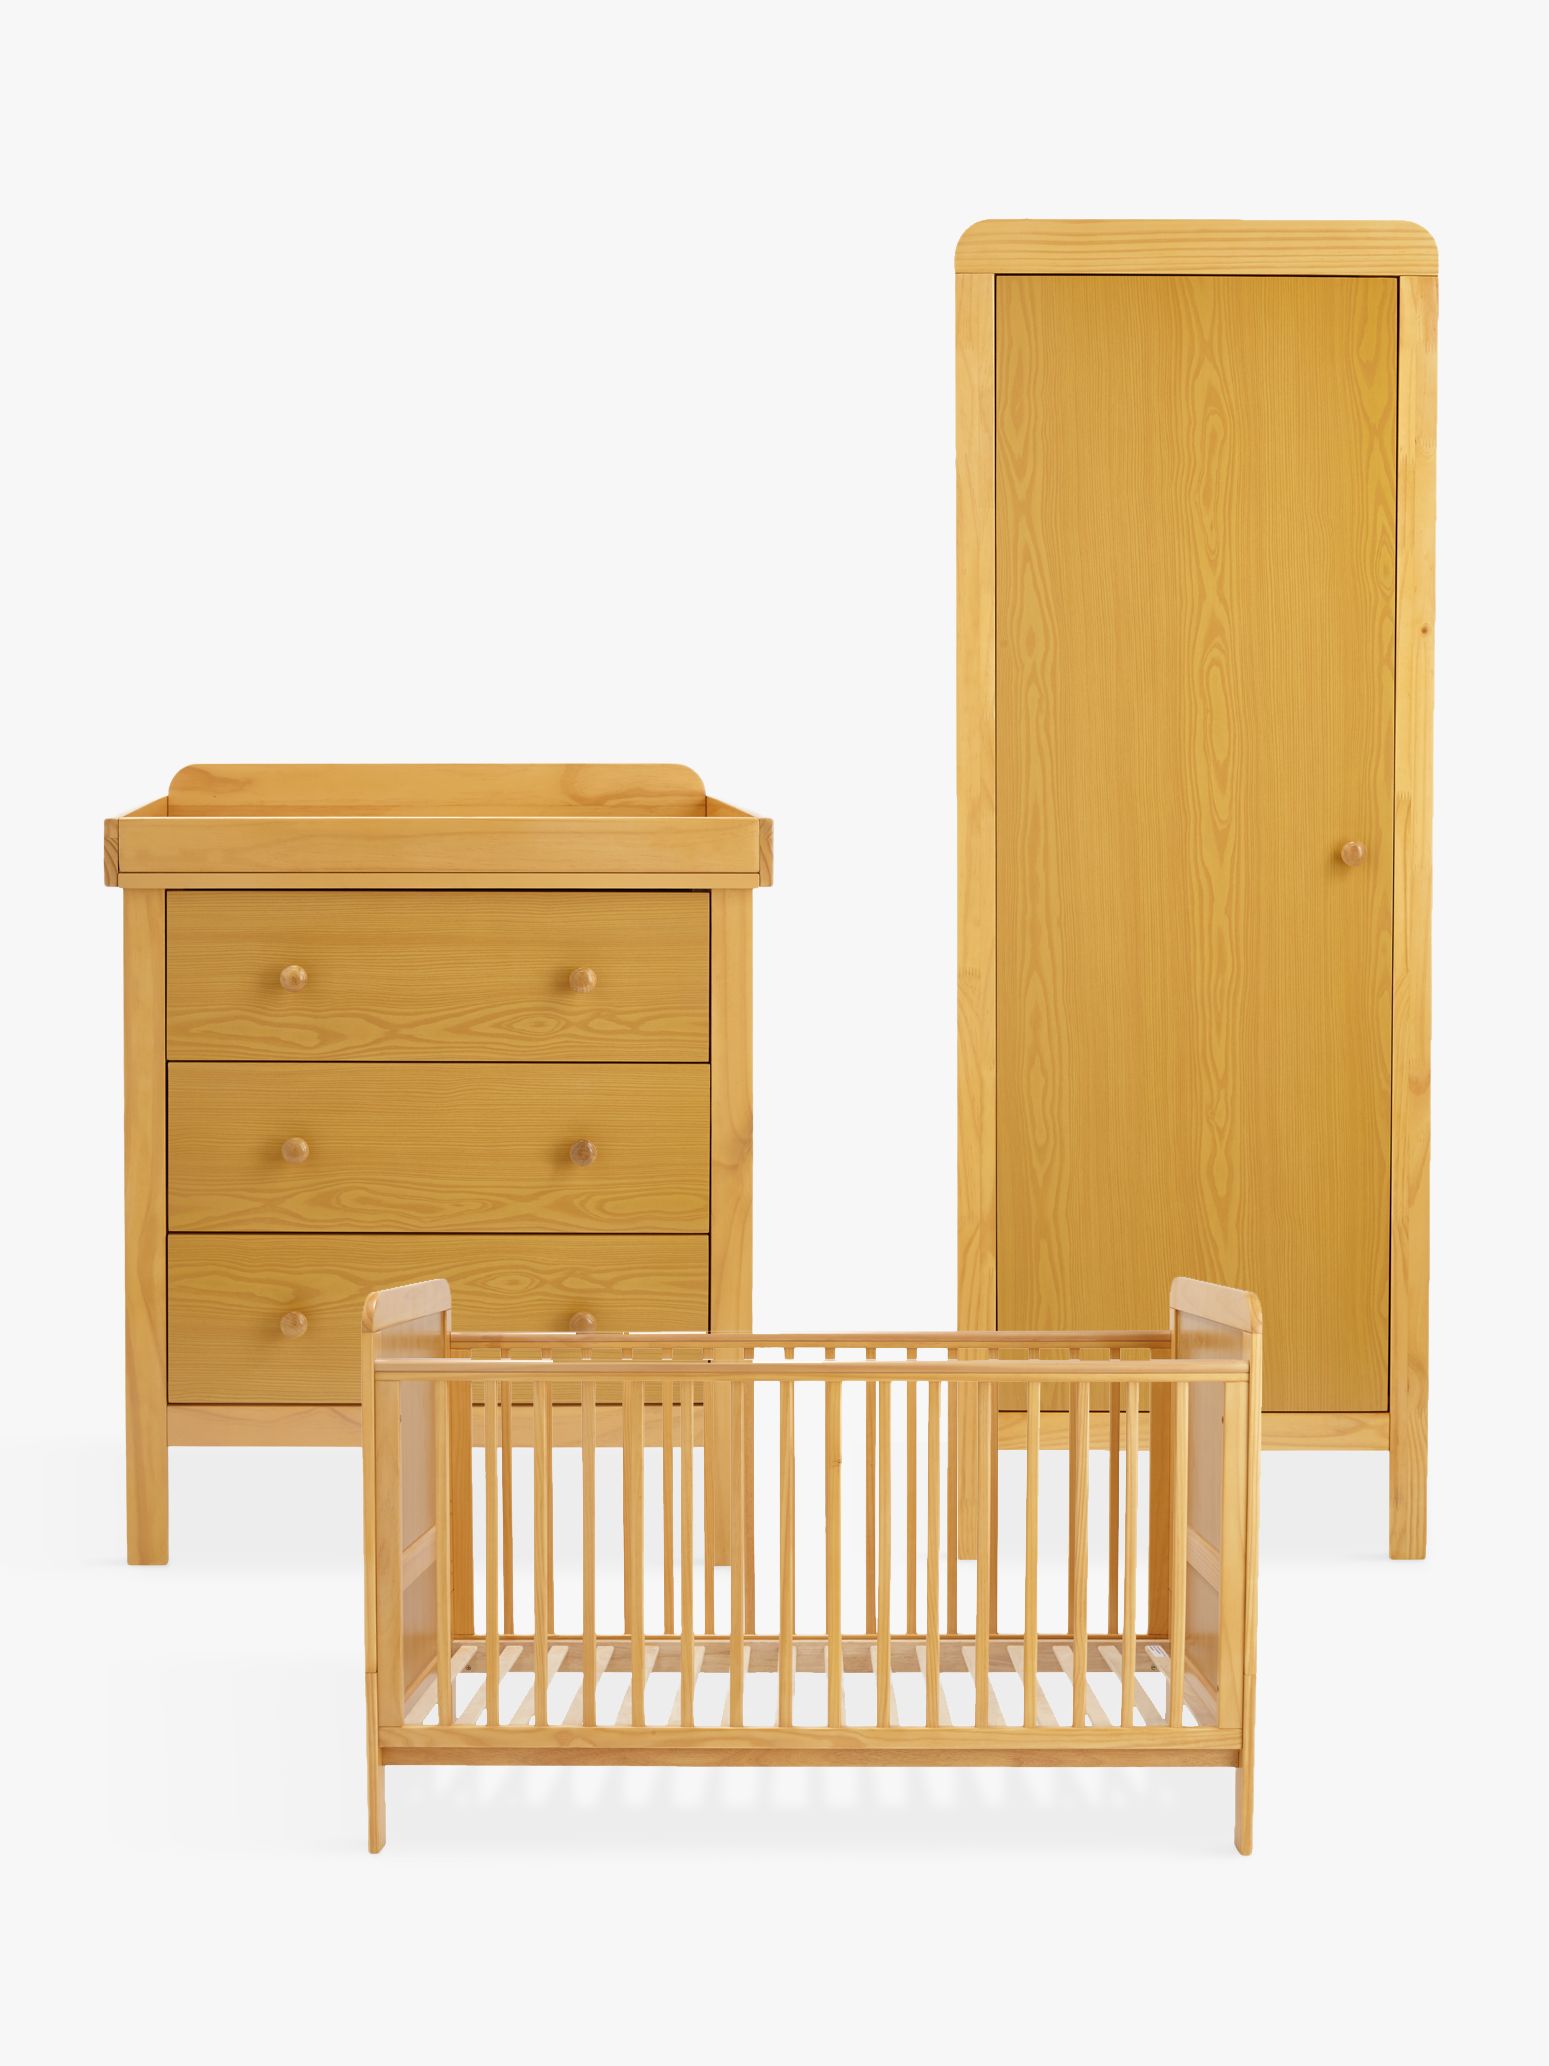 south shore cuddly changing table